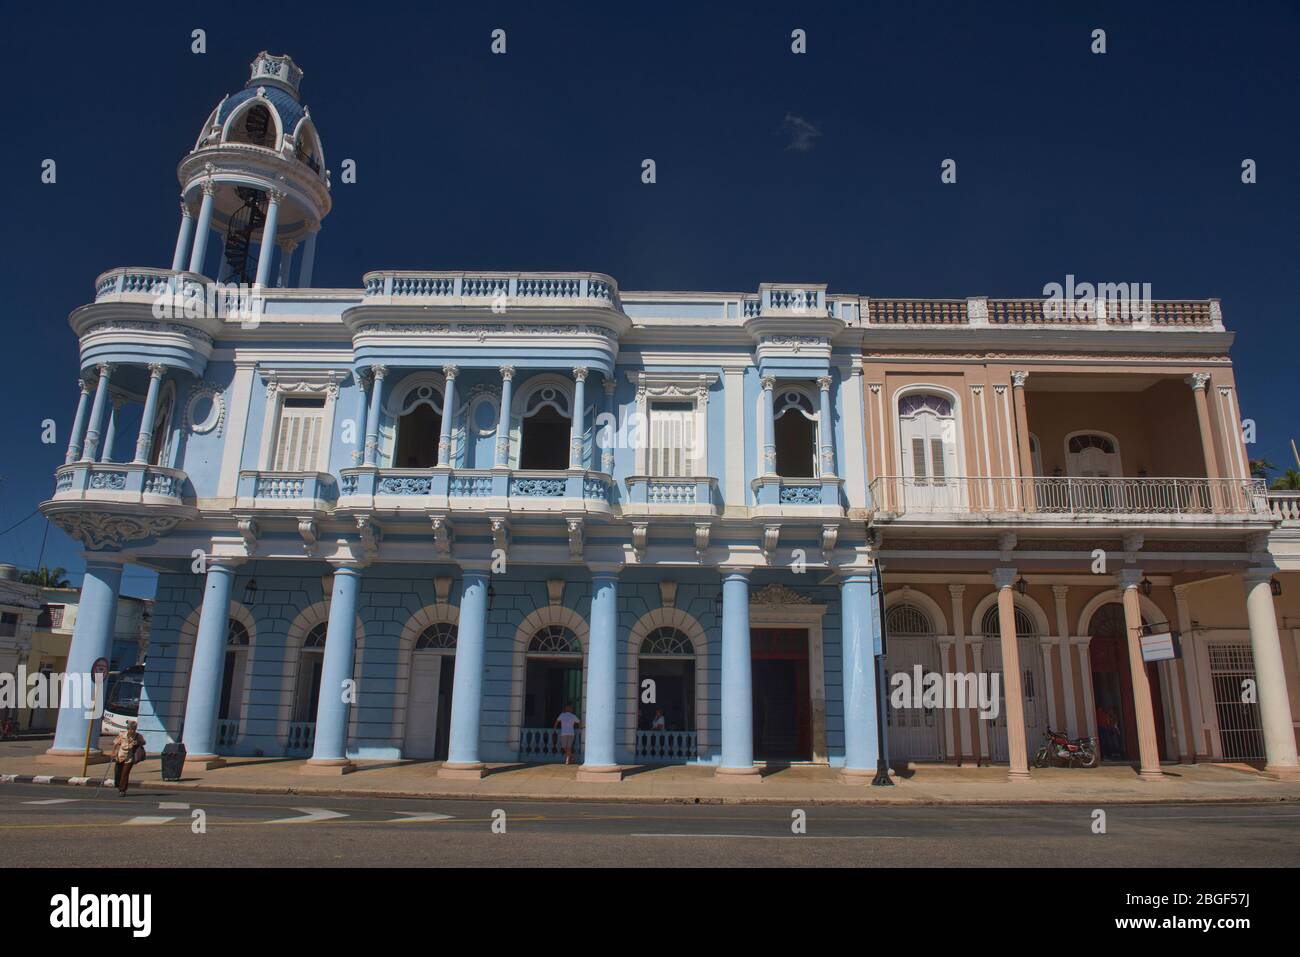 Neoclassical colonial architecture, Ferrer Palace, Cienfuegos, Cuba Stock Photo